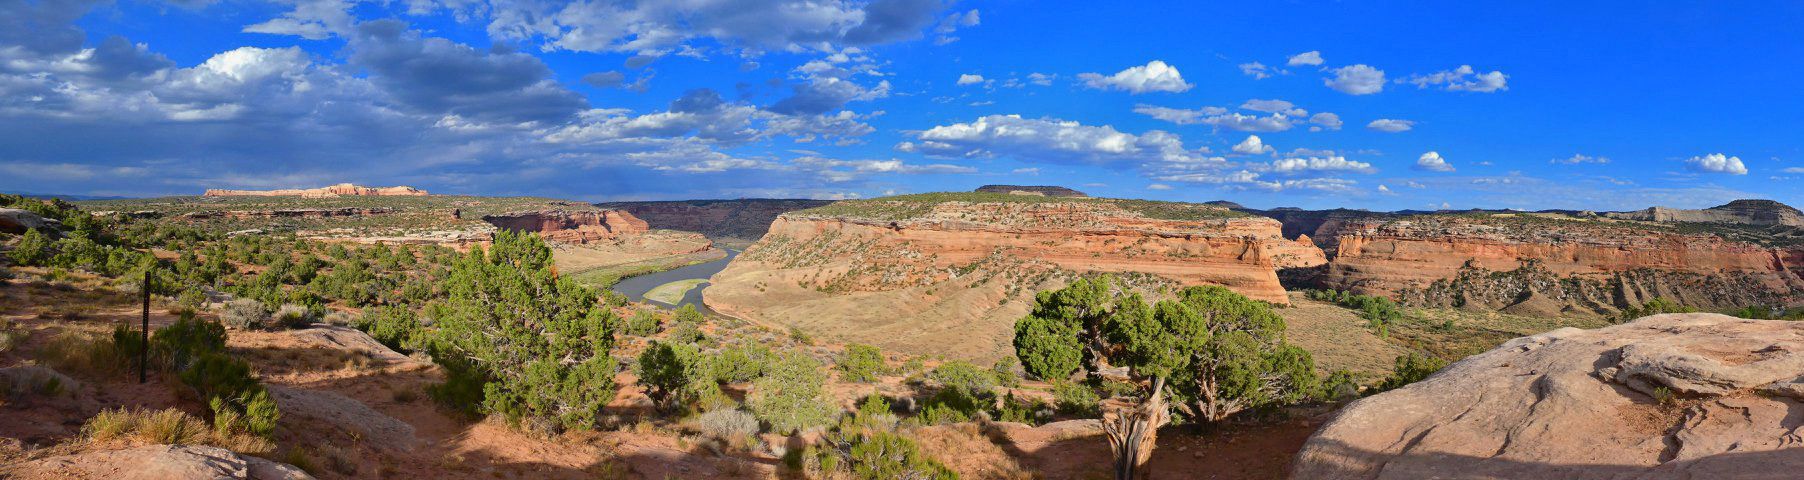 Panorama of the canyons